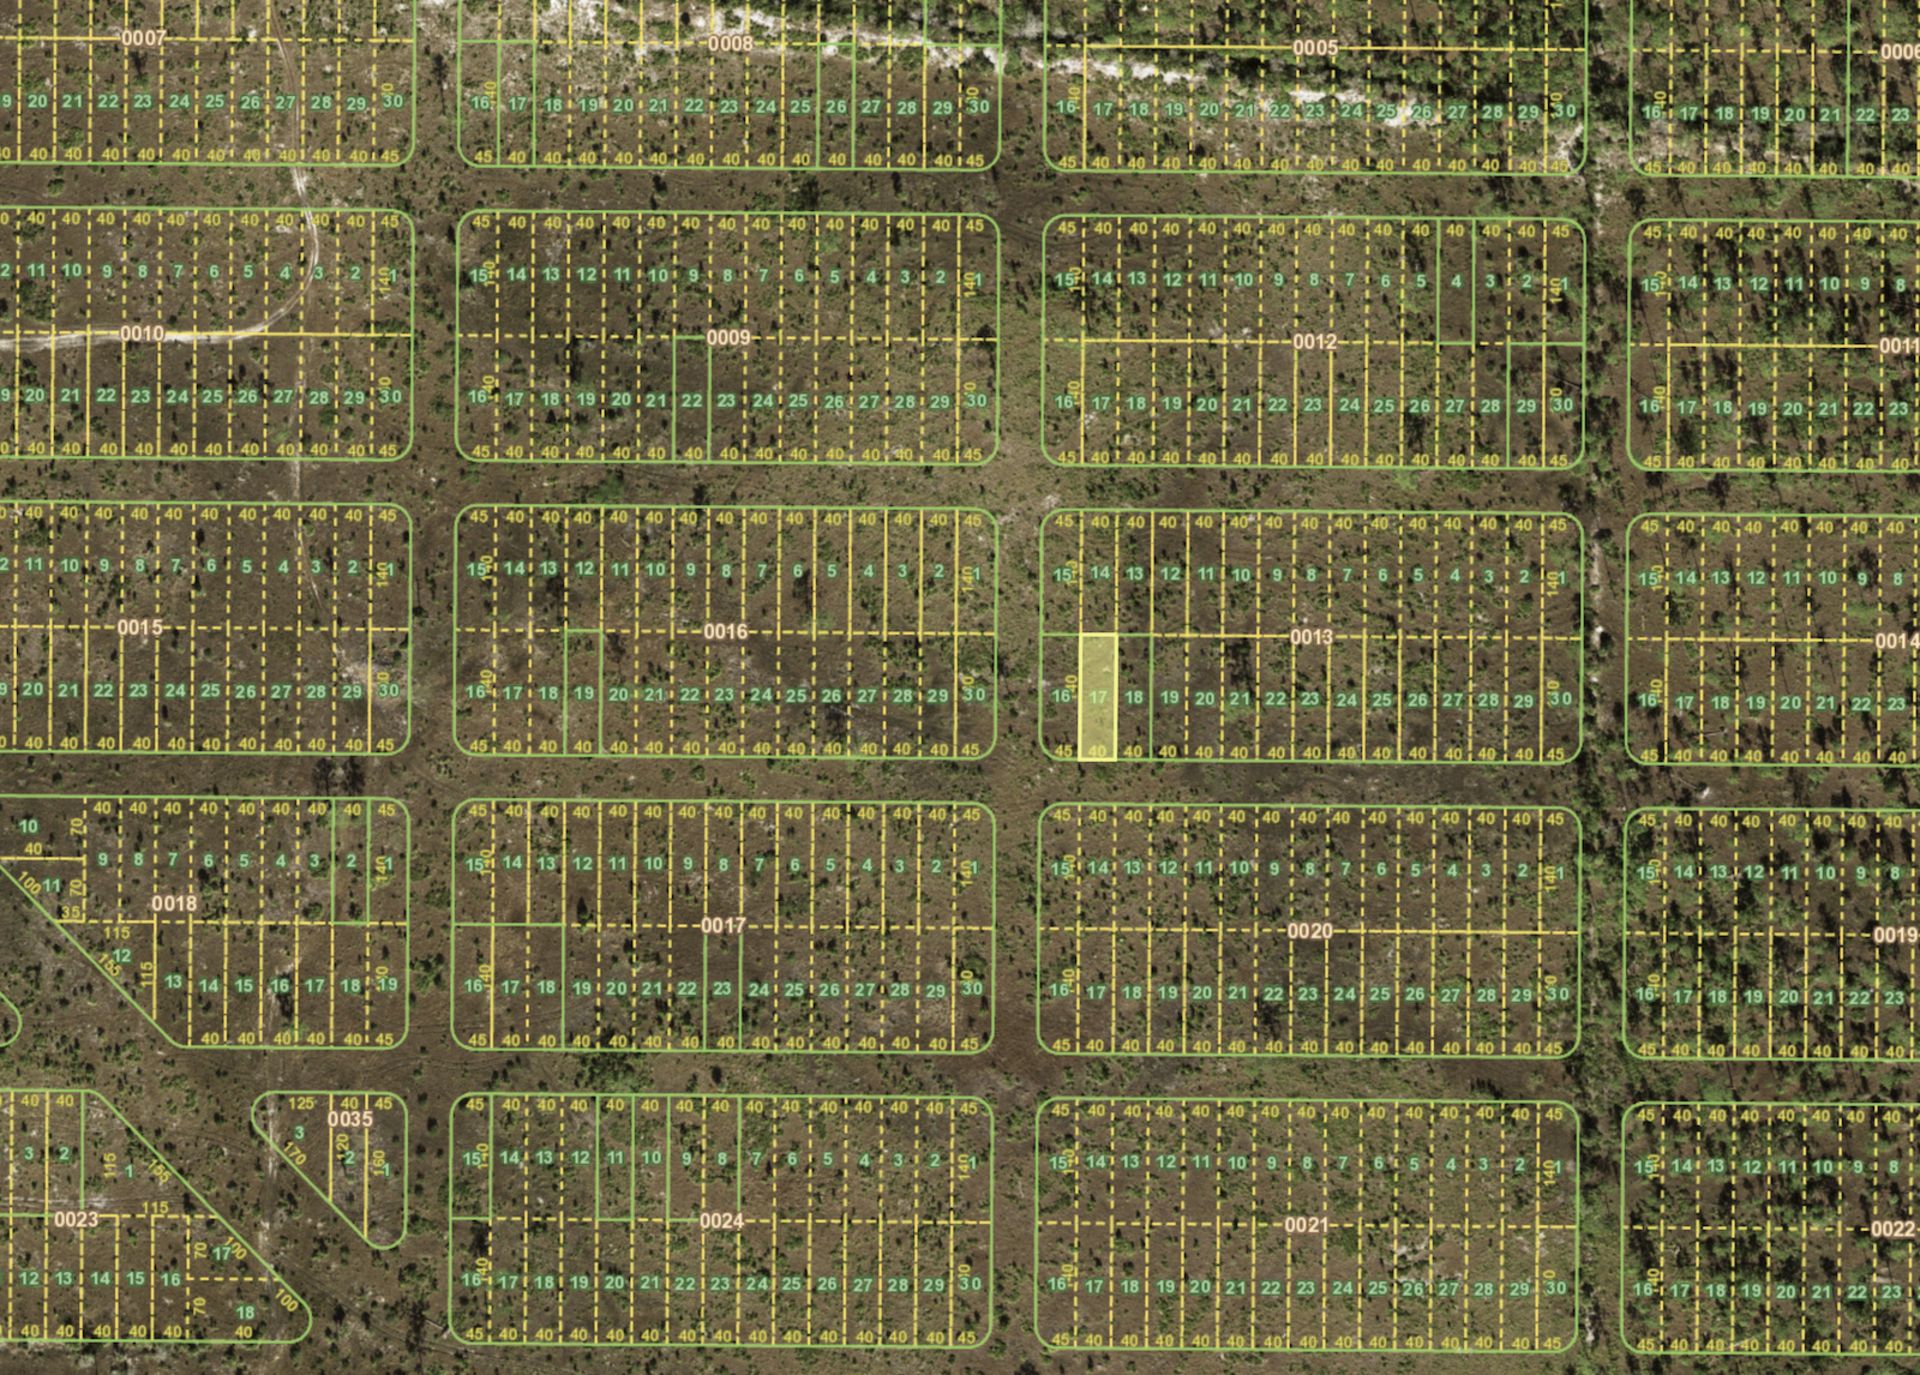 Prime Plot in Charlotte County, Florida: Your Slice of Sunshine! - Image 9 of 10